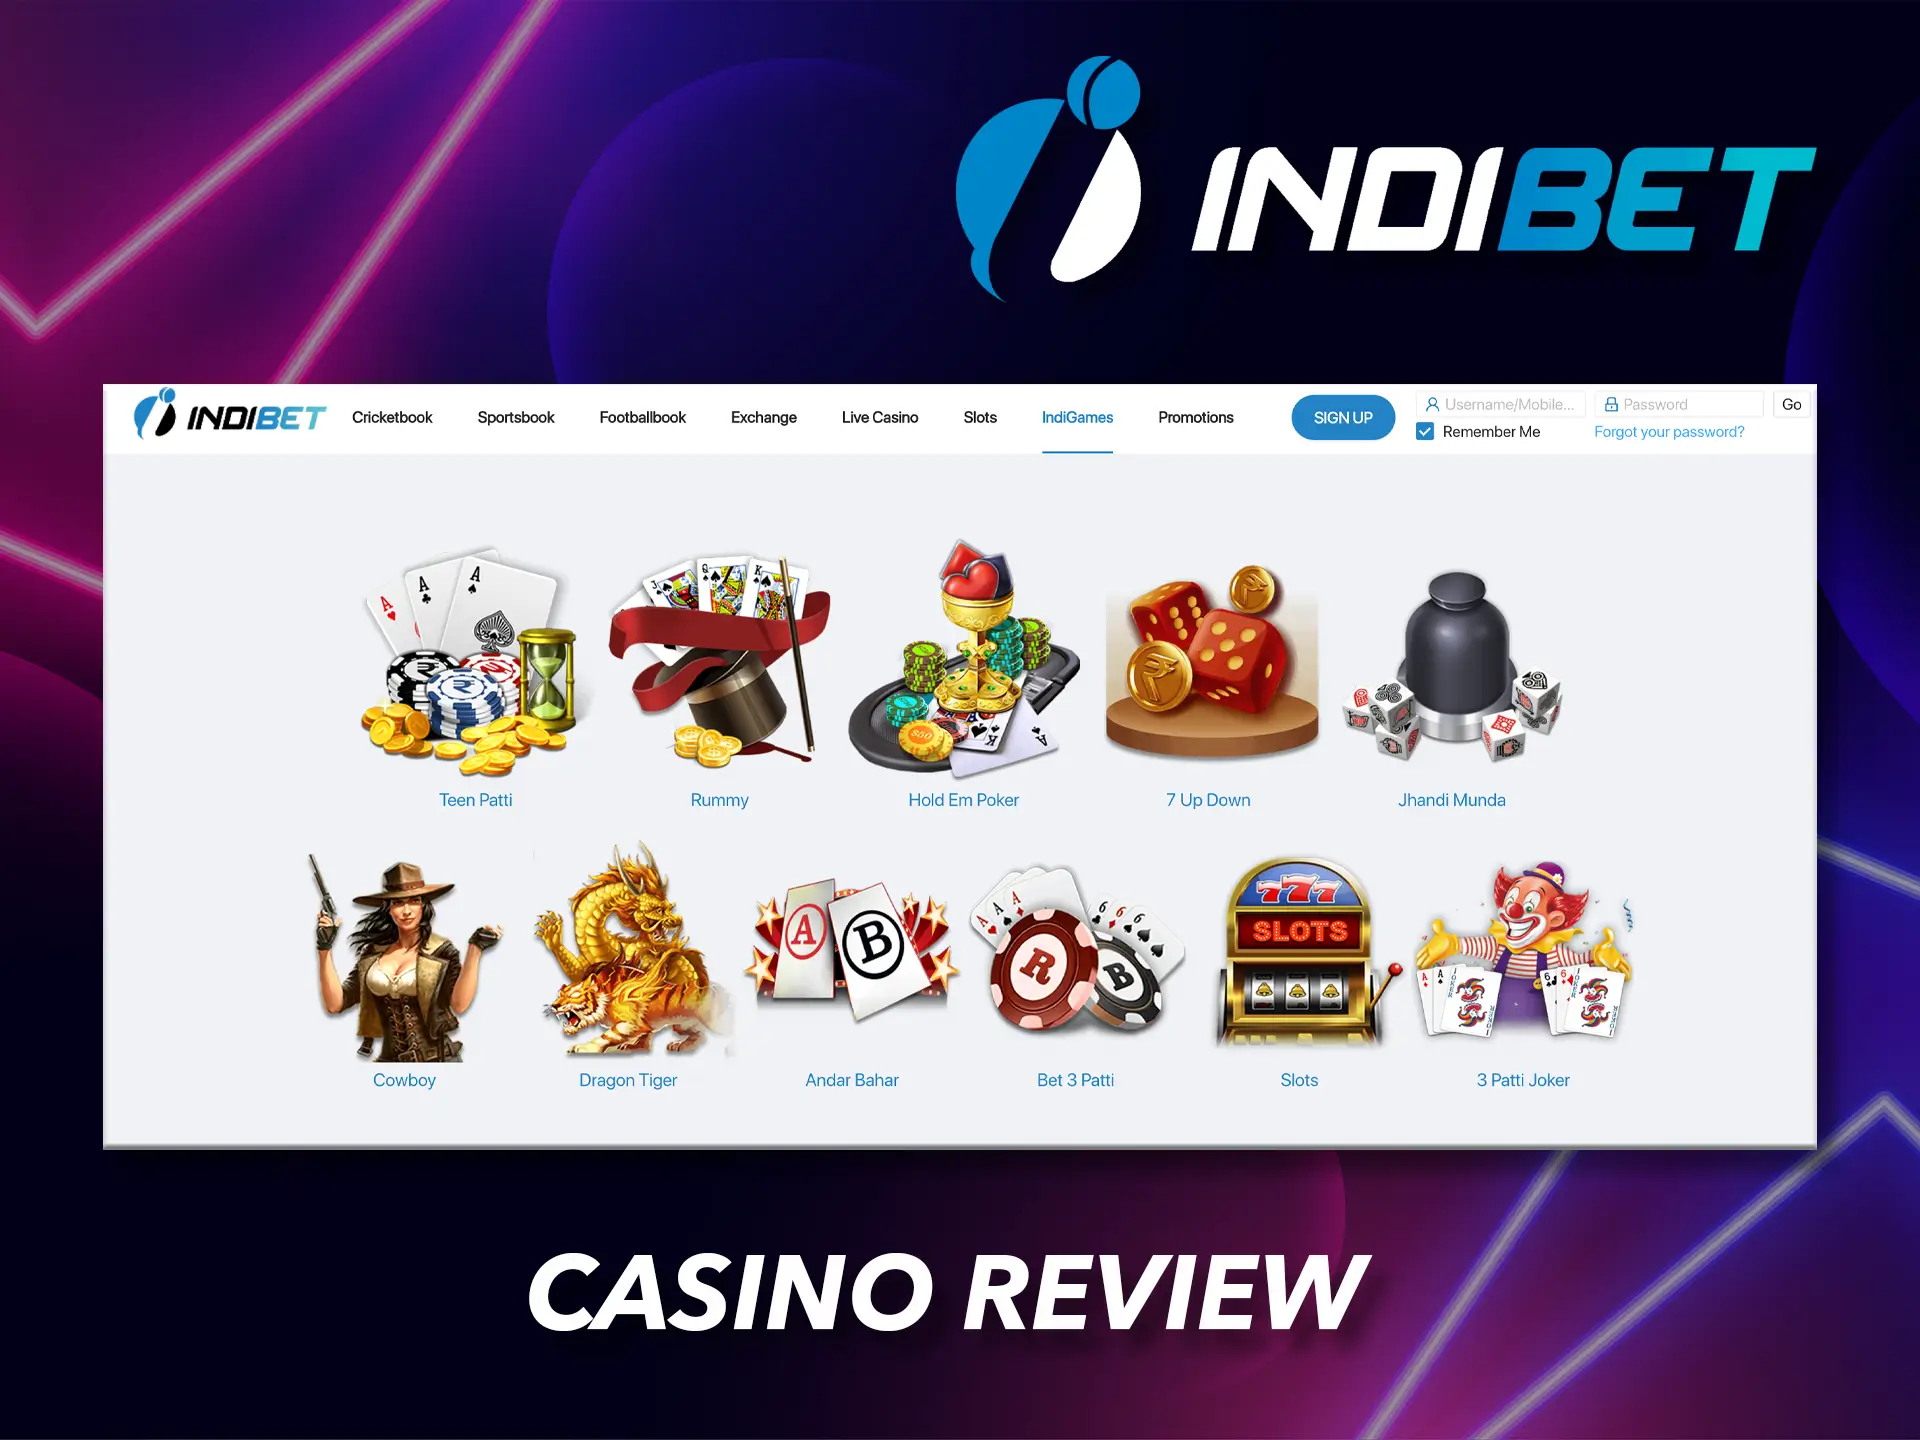 Gambling enthusiasts will find a casino from Indibet.